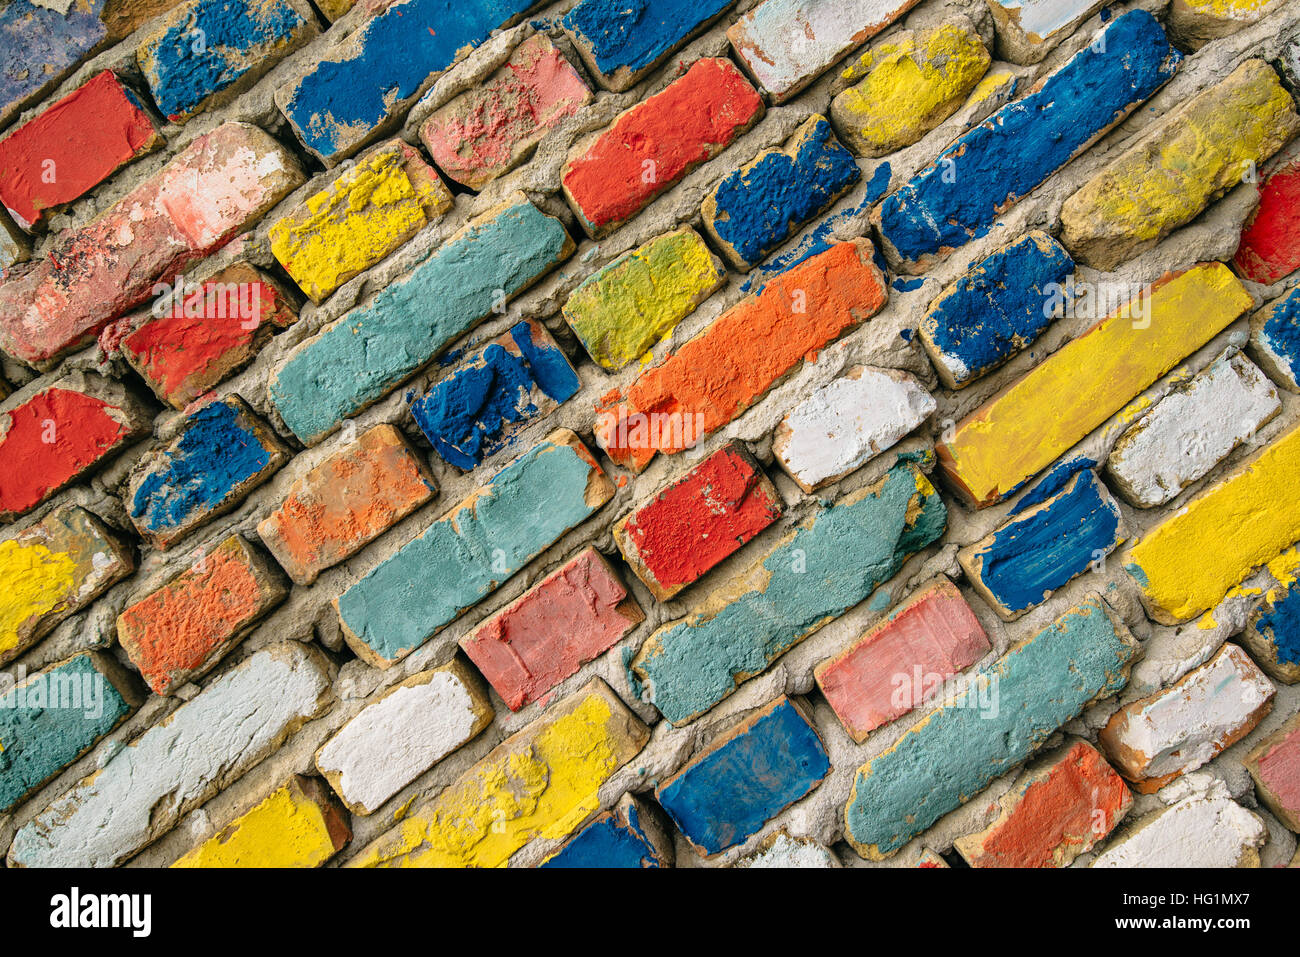 Multicolored painted bricks, exterior wall as background, urban pattern Stock Photo